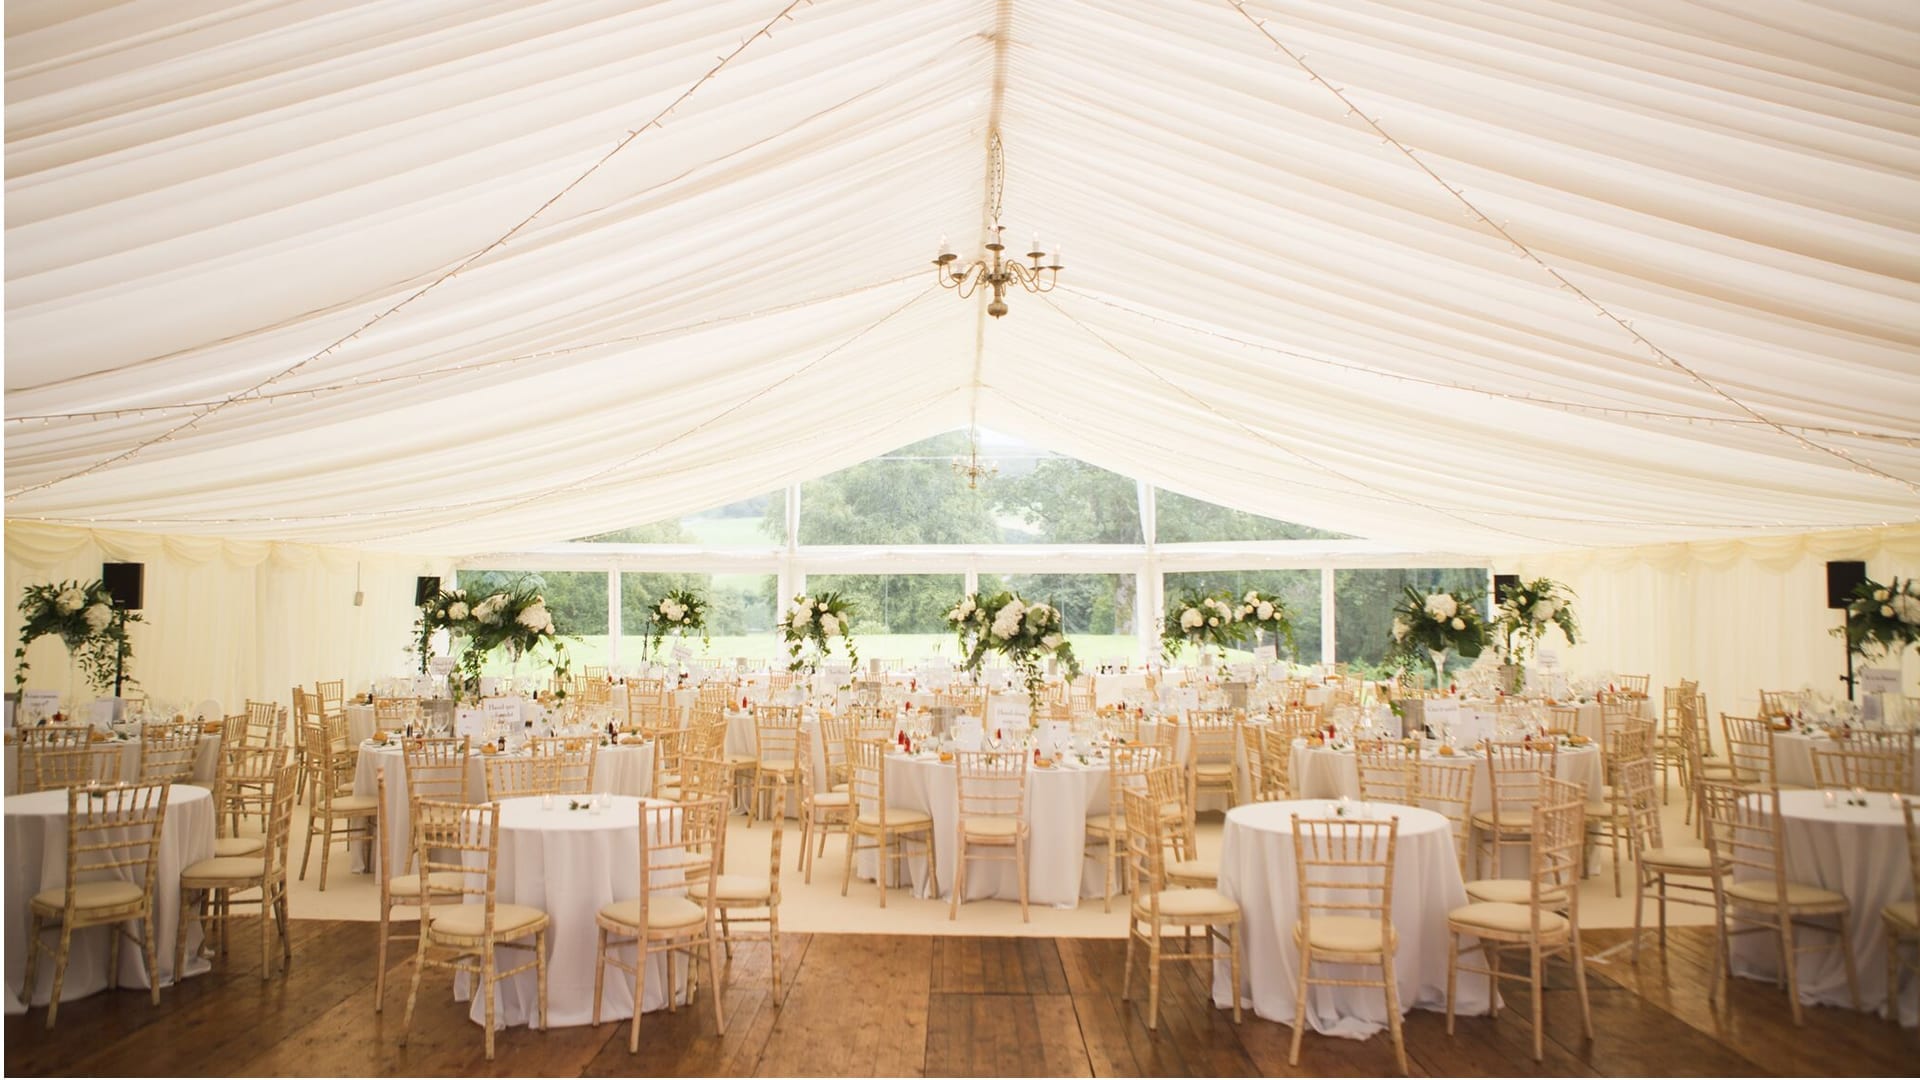 Marquee set up for wedding reception at Barony Castle